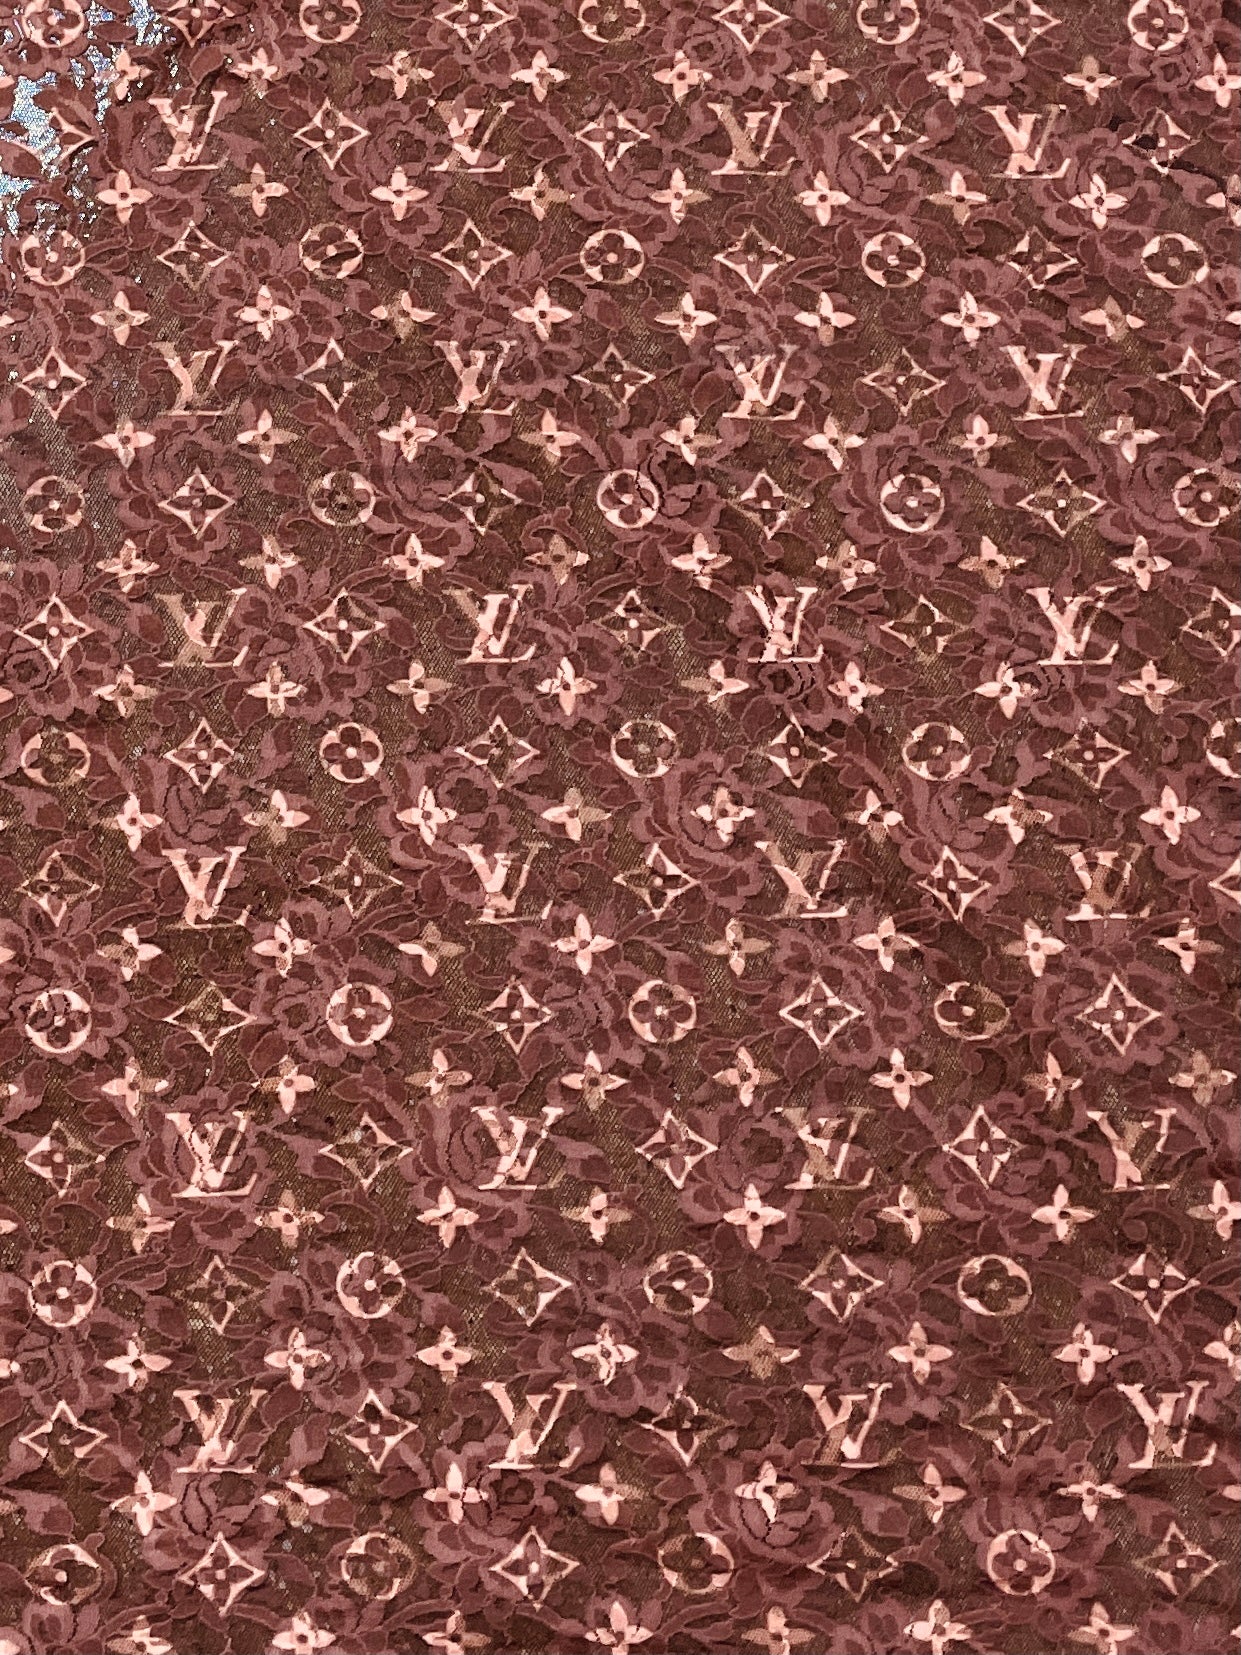 vuitton fabric by the yard